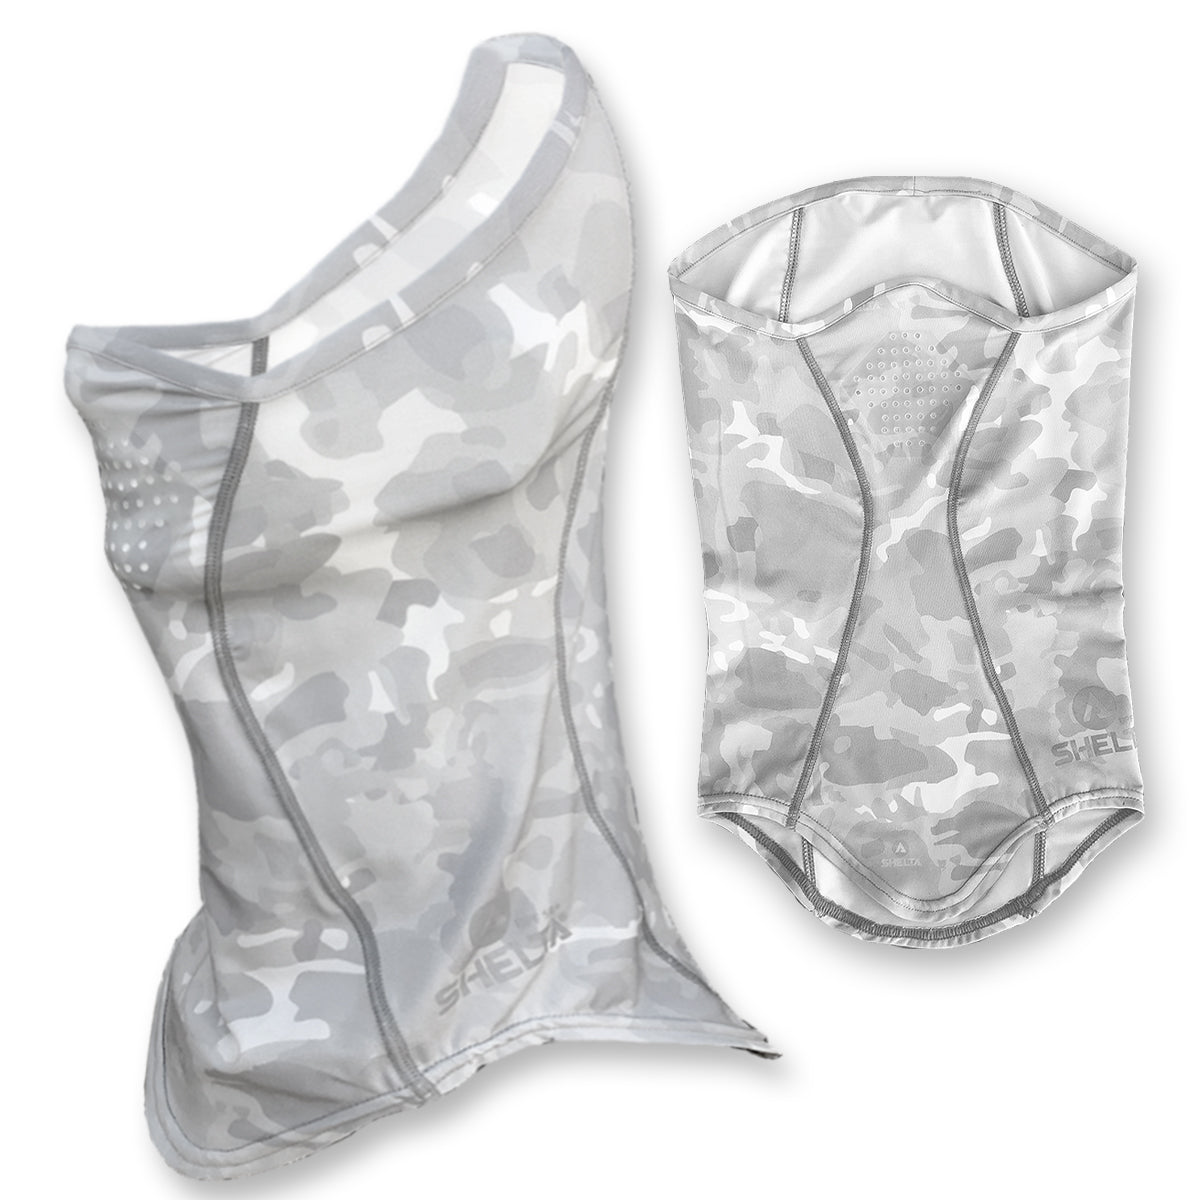 Our Face Gaiter in the Overcast Grey Color protects your face and neck from harmful UV rays. Sun protection that won’t wear off, it allows you to spend the whole day on the water or in the field without burning. Made from lightweight, moisture wicking stretch fabric, our gaiter features silicone coated laser-cut breathing holes.  The breathable fabric offers UPF 50+ UV protection and covers the top of your nose down to your neckline with enough height in the back to fit over a cap or under your sunhat.